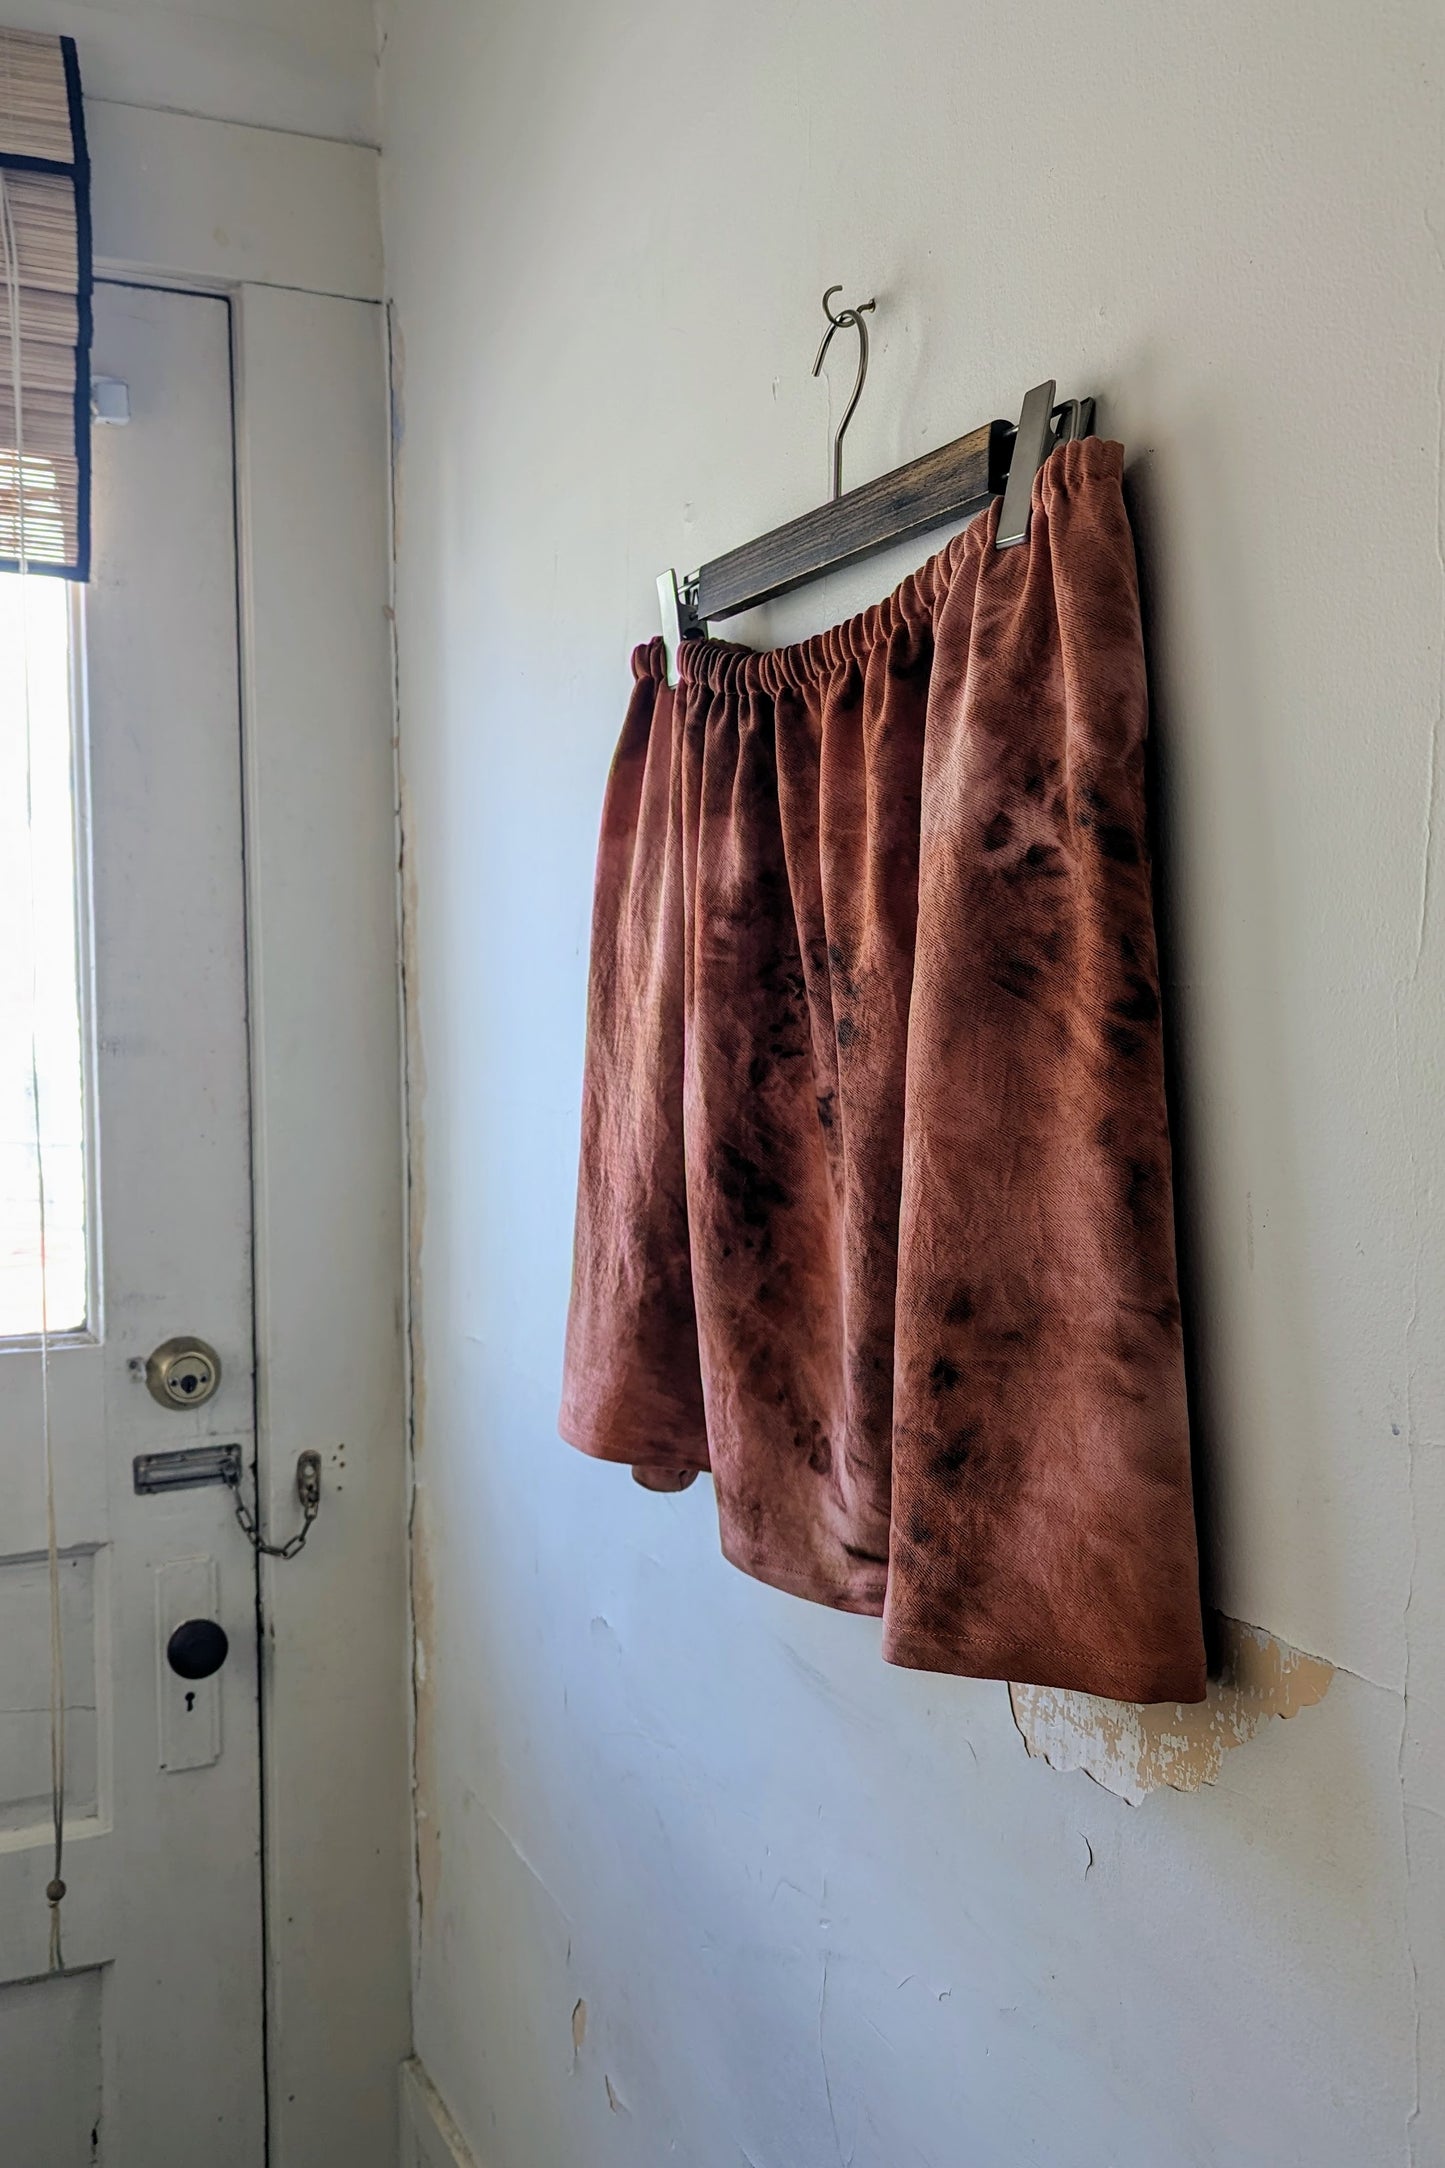 A-Line Skirt in "Grand Canyon" Hand-Dyed Tencel (Sample Sale, size 3X-4X)